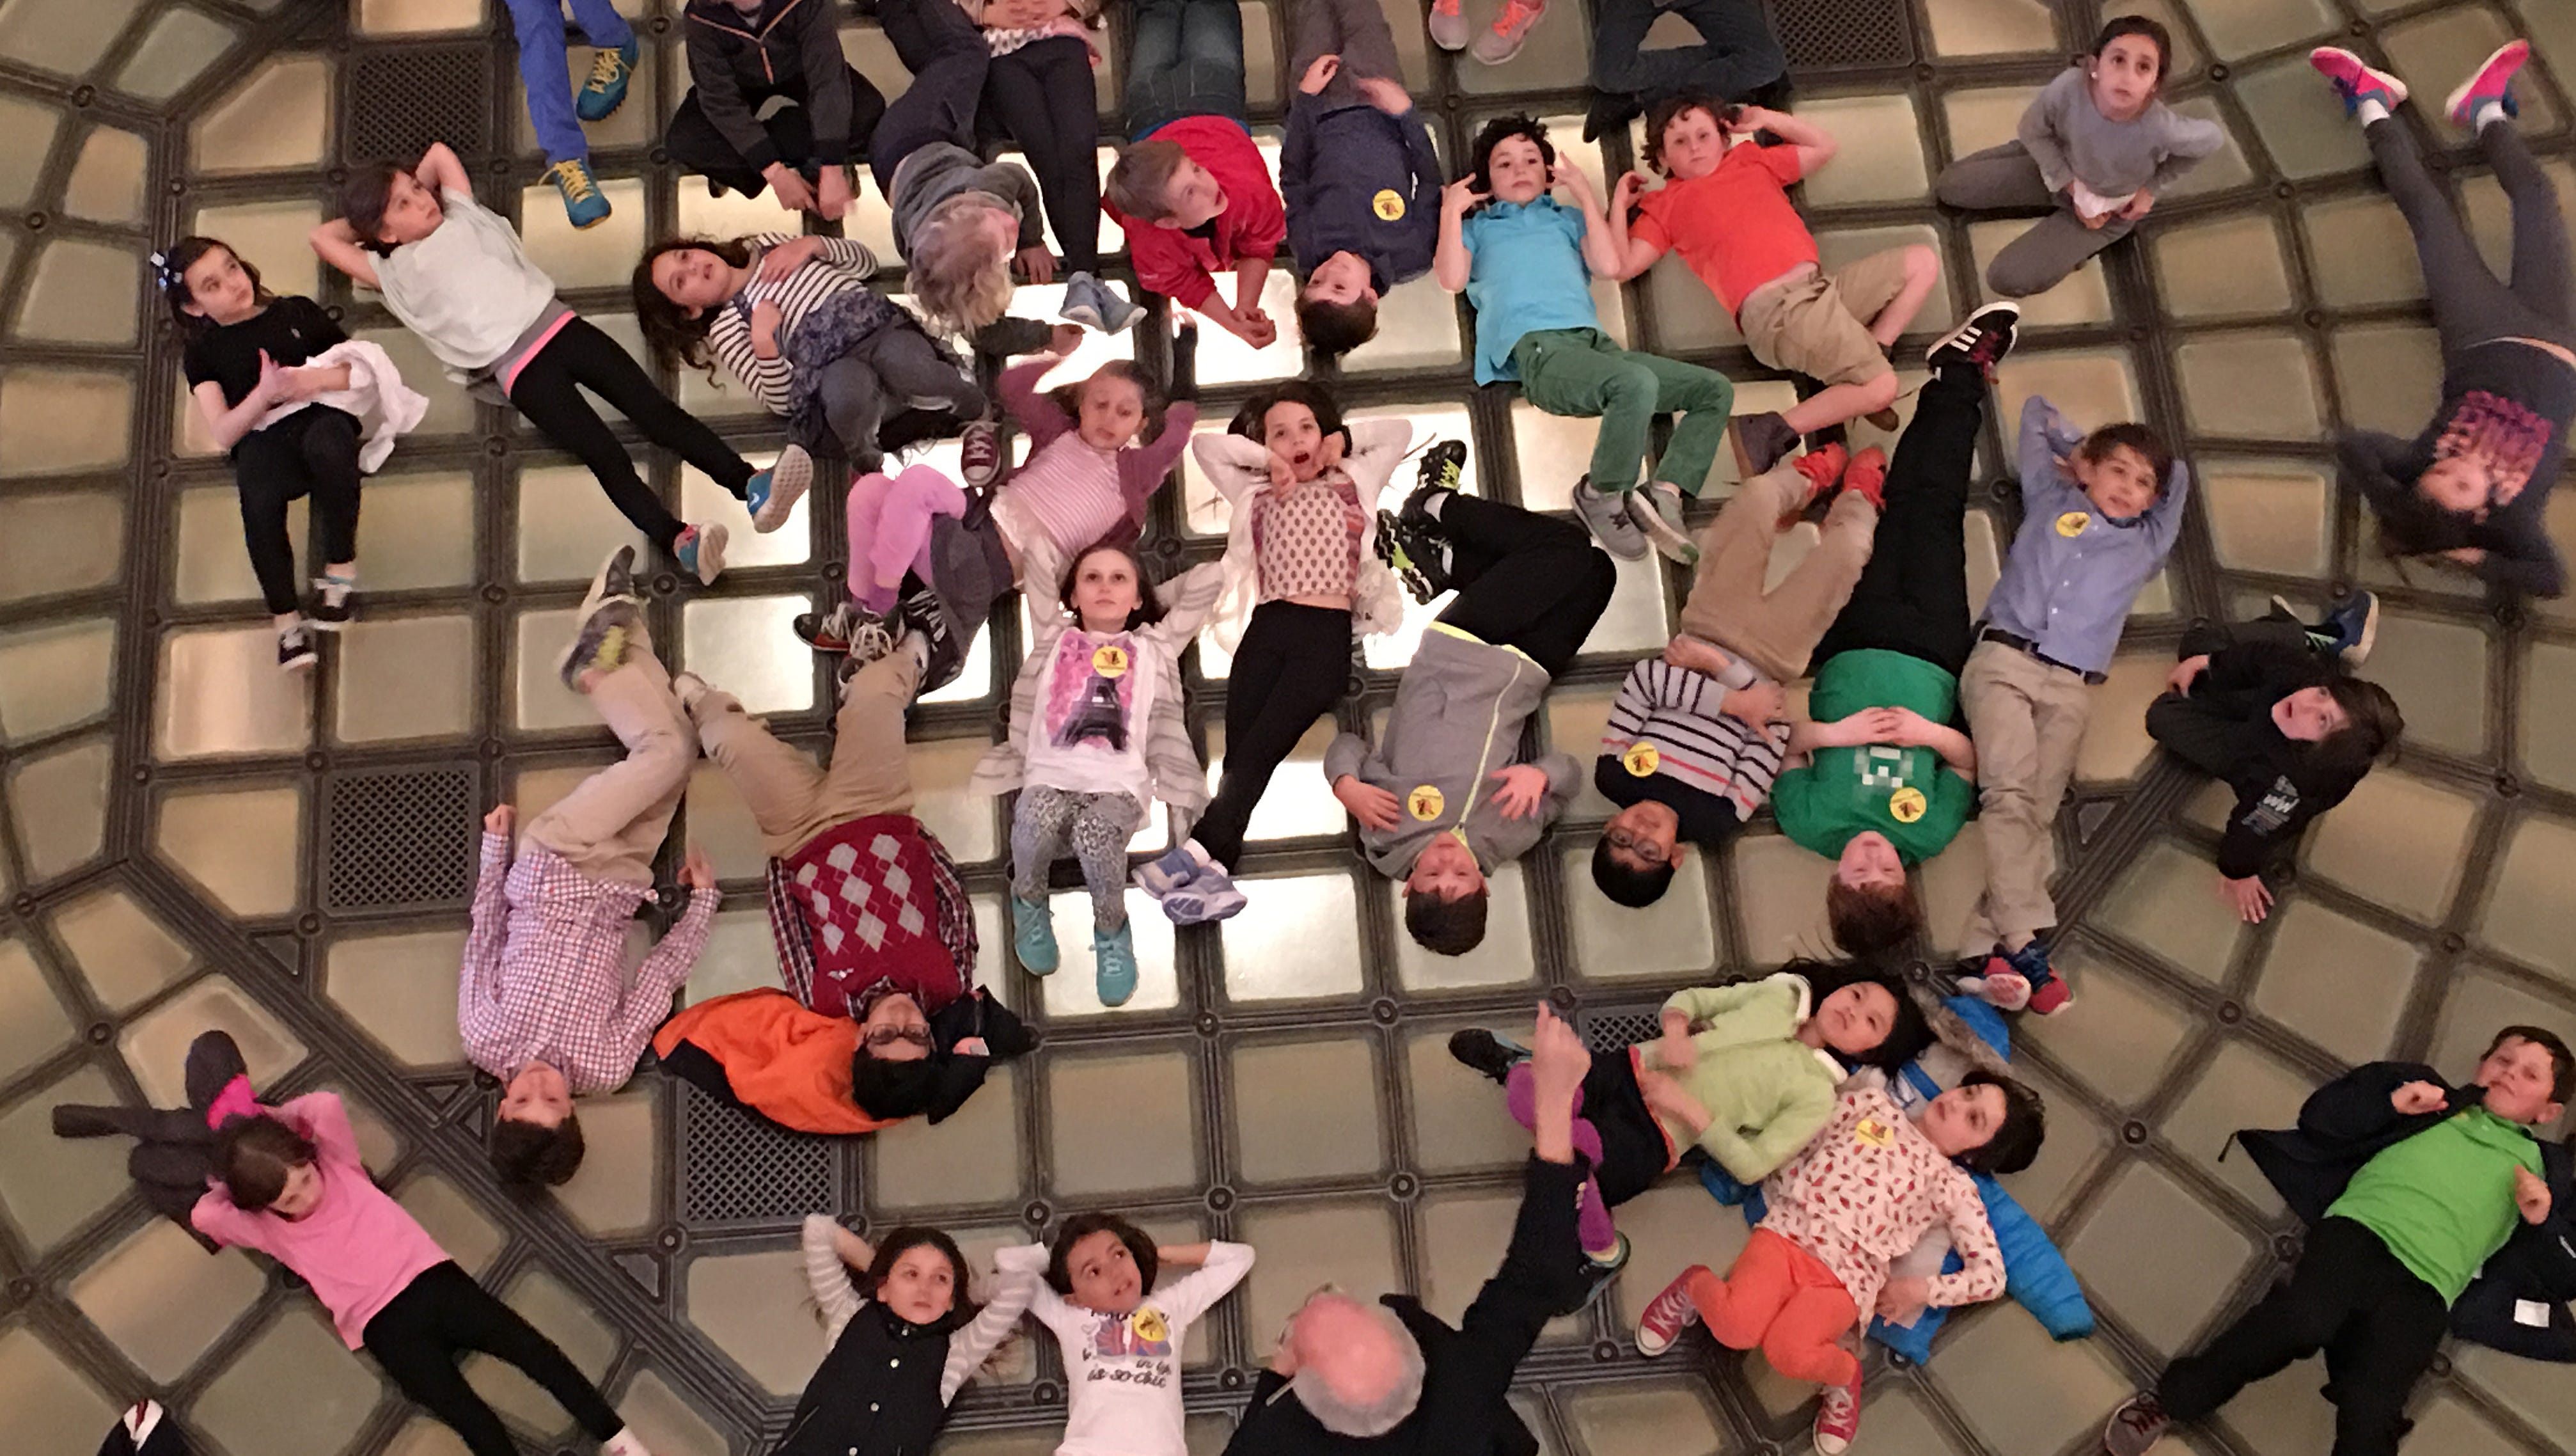 Third graders from Cranbrook Schools in Bloomfield Hills lie on the floor of the state Capitol and look up at the dome in "Capitol Tour from the Capitol Floor," by Keith Lublin of West Bloomfield. "Although we chaperones were supposed to stay together with the kids," Lublin said, "I couldn't resist slipping away to the second floor to capture this picture."